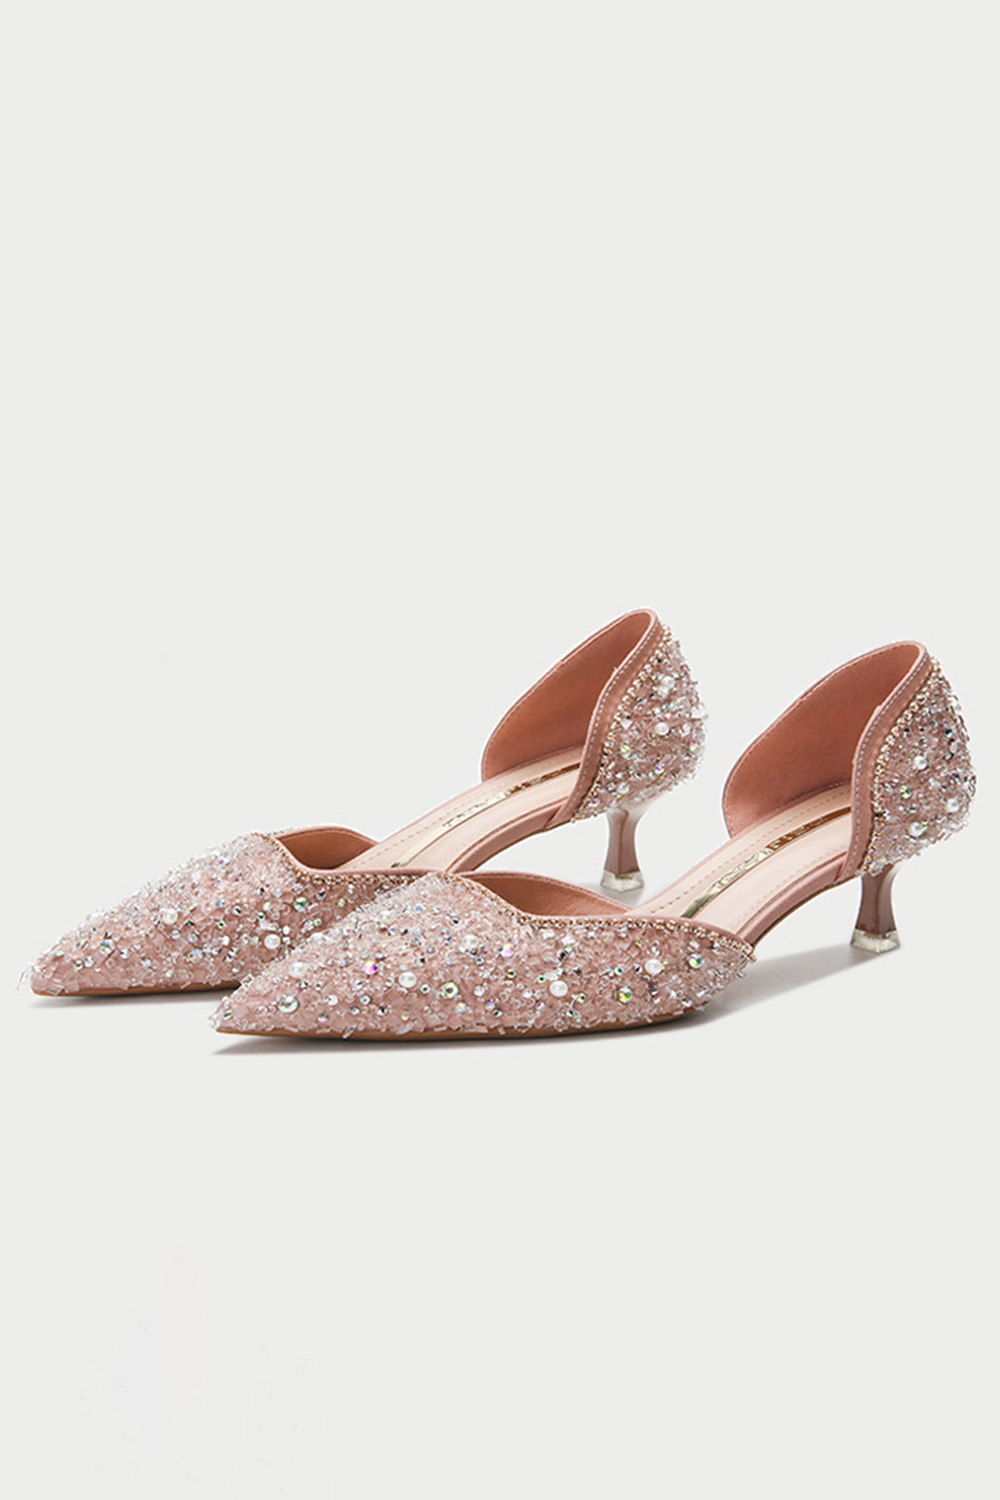 Party Apricot Rhinestone Beaded Pointed Toe Kitten Heels Shoes